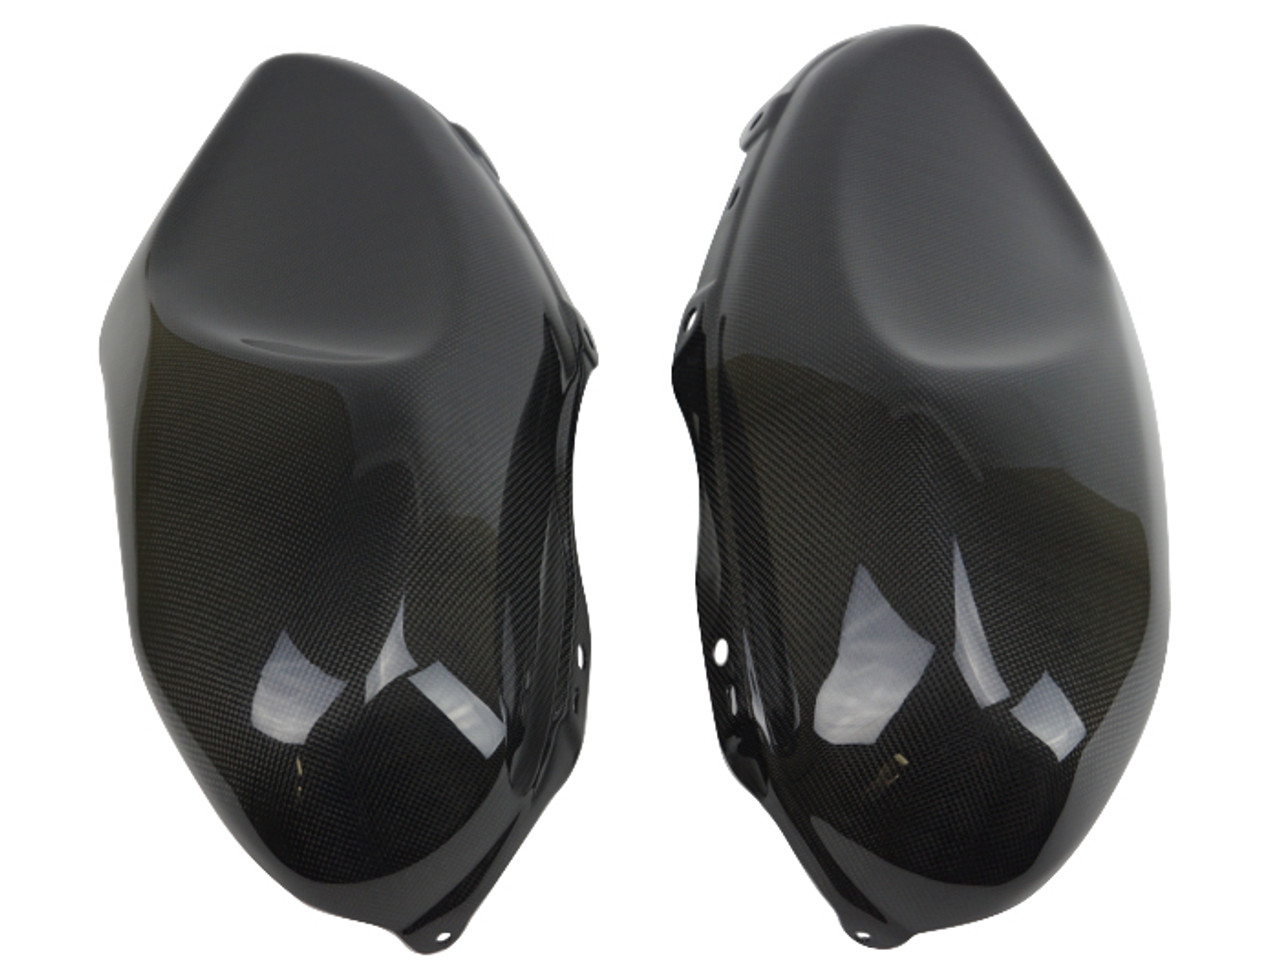 Tank Side Covers in Glossy Twill Weave 100% Carbon Fiber for Yamaha XSR900